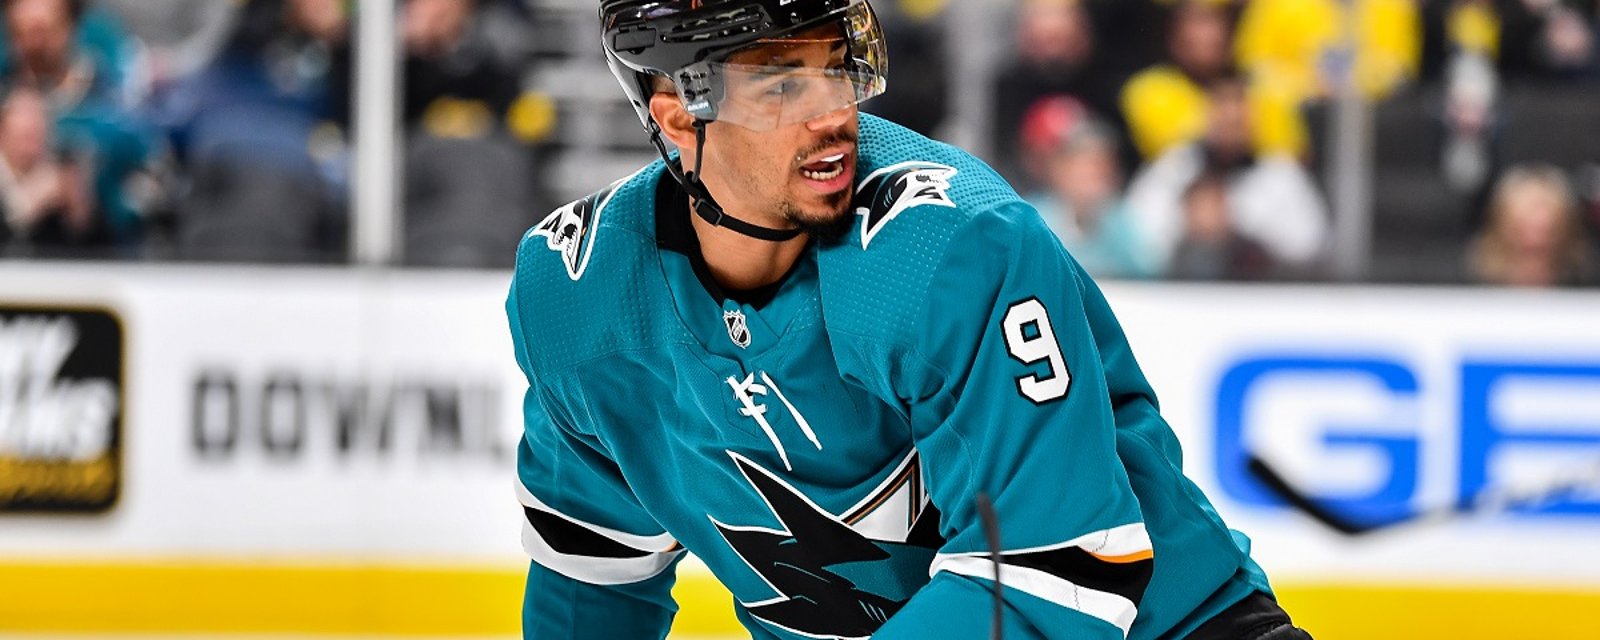 Rumor: Evander Kane's wife claims he has been fixing NHL games.